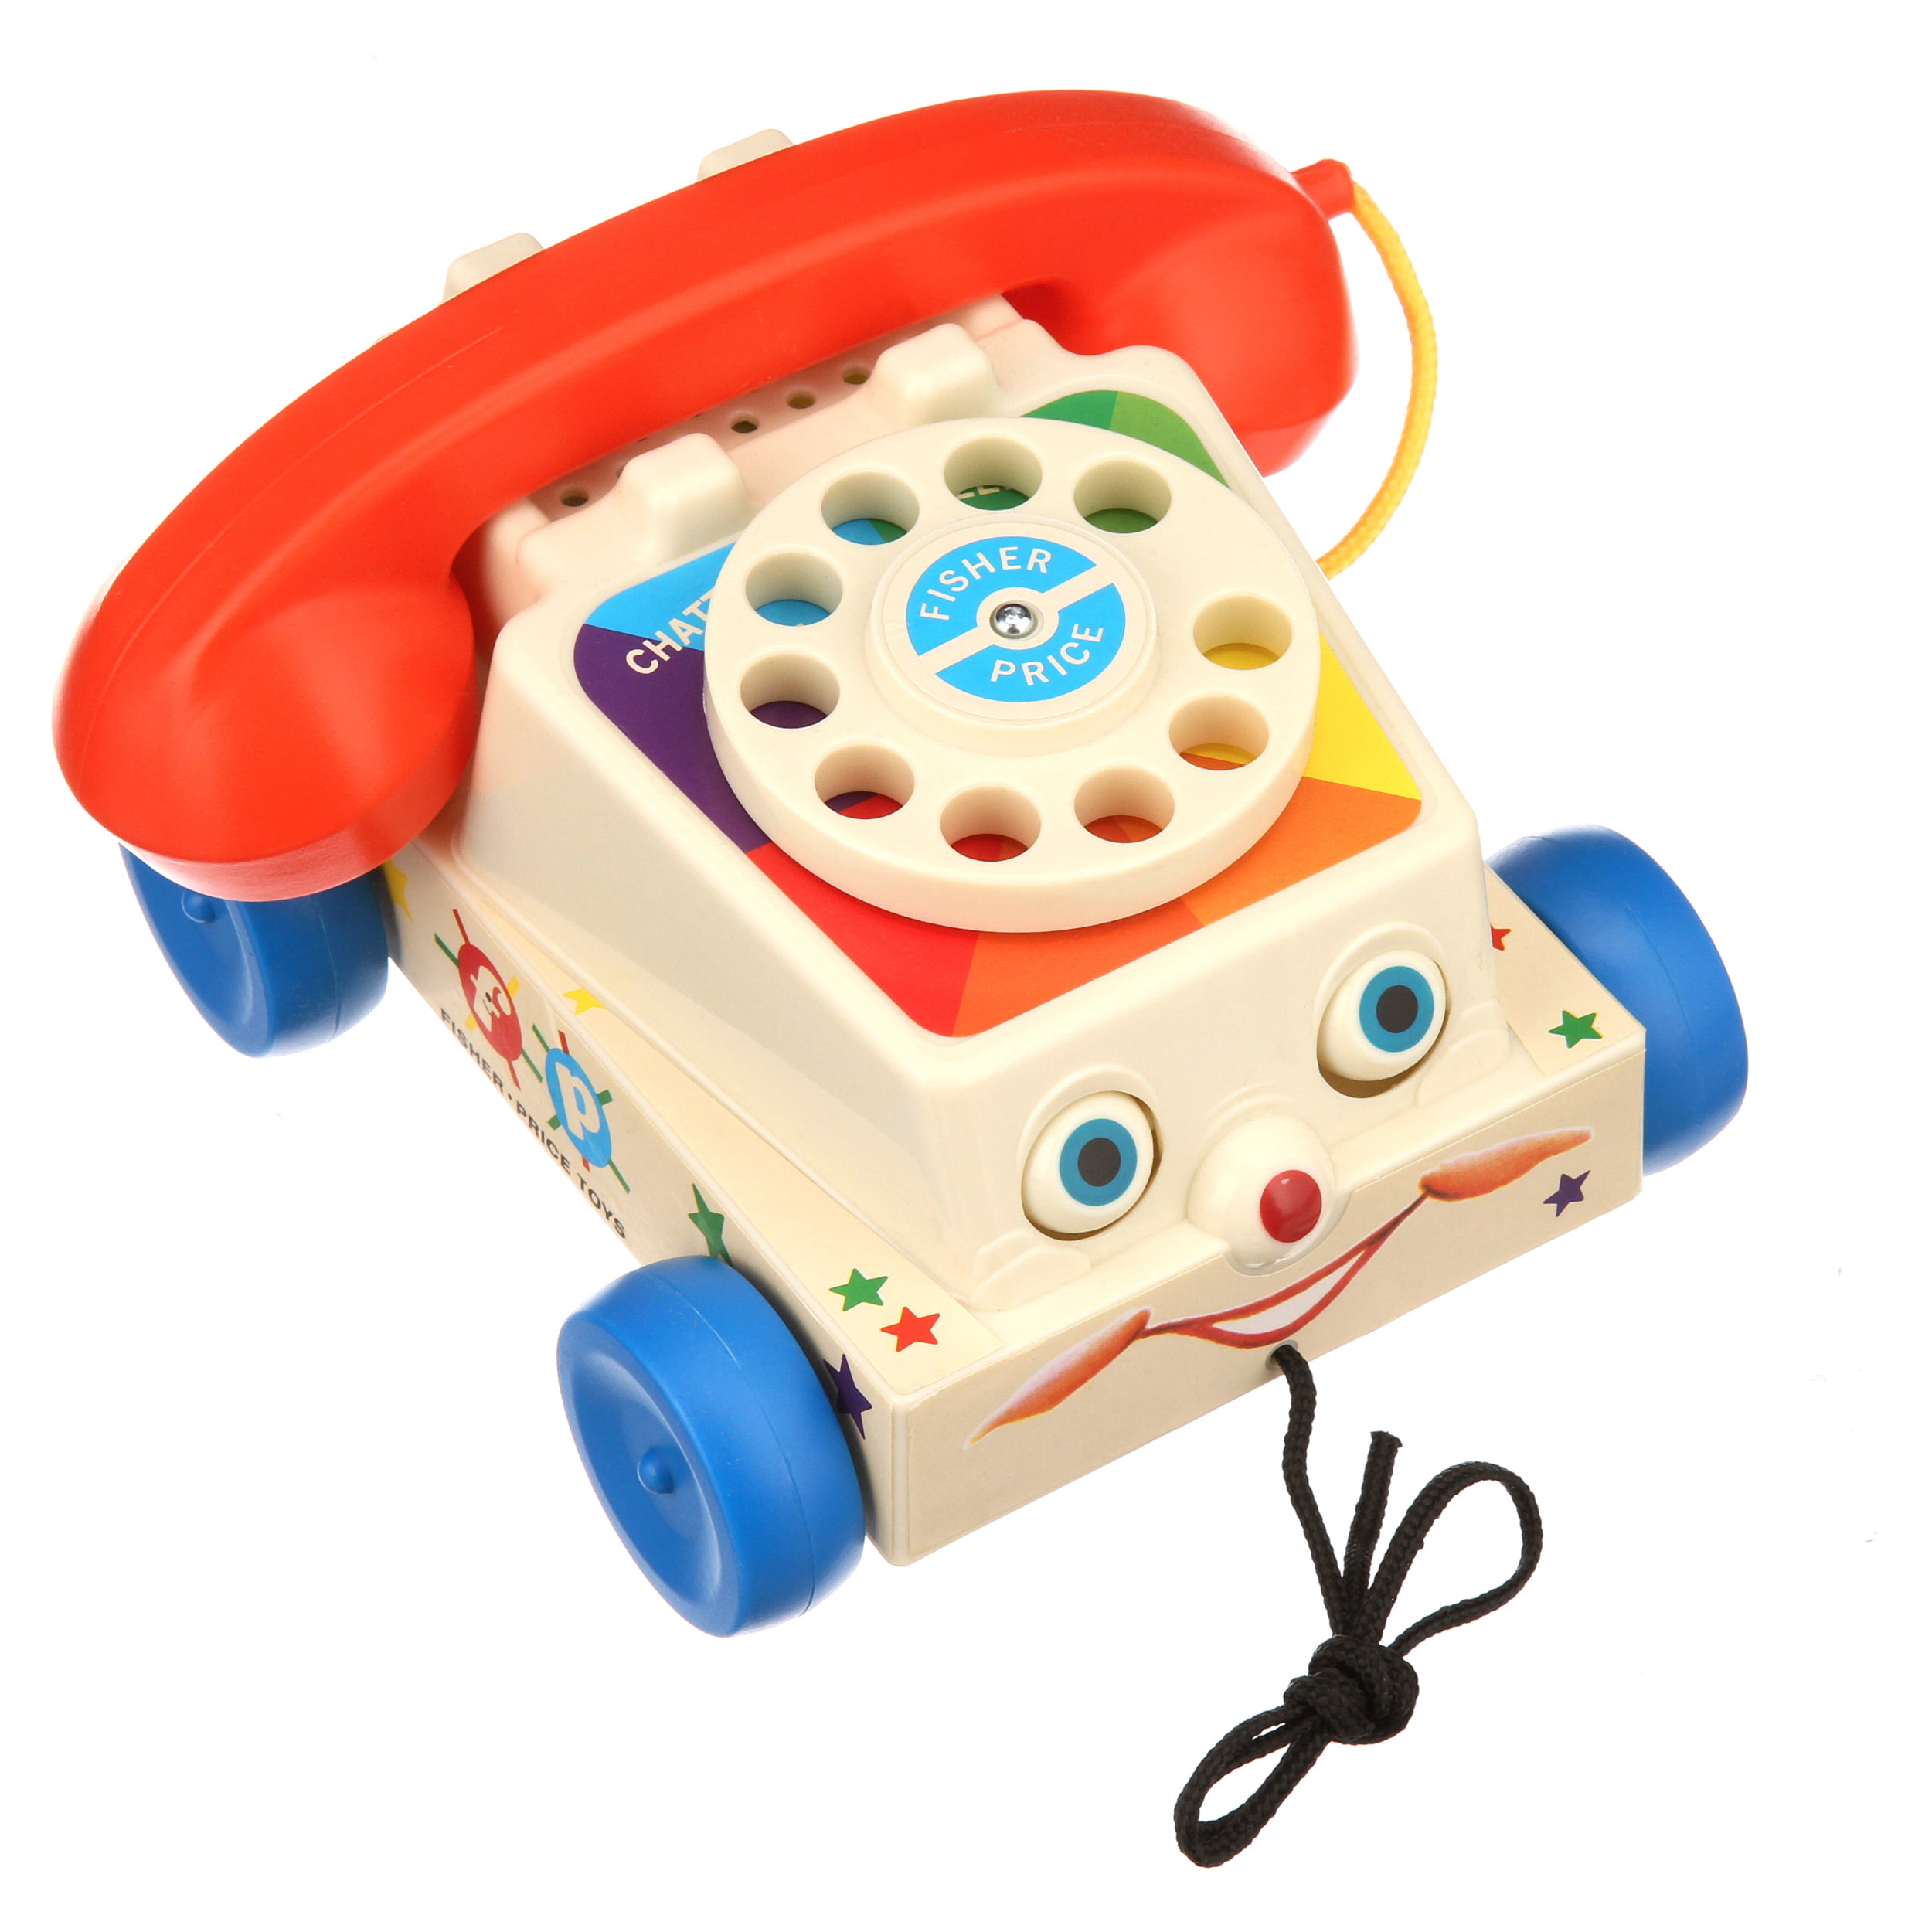 Telephone Toy Chatter Fisher Talking Phone Baby Fun 2 Days for sale online 